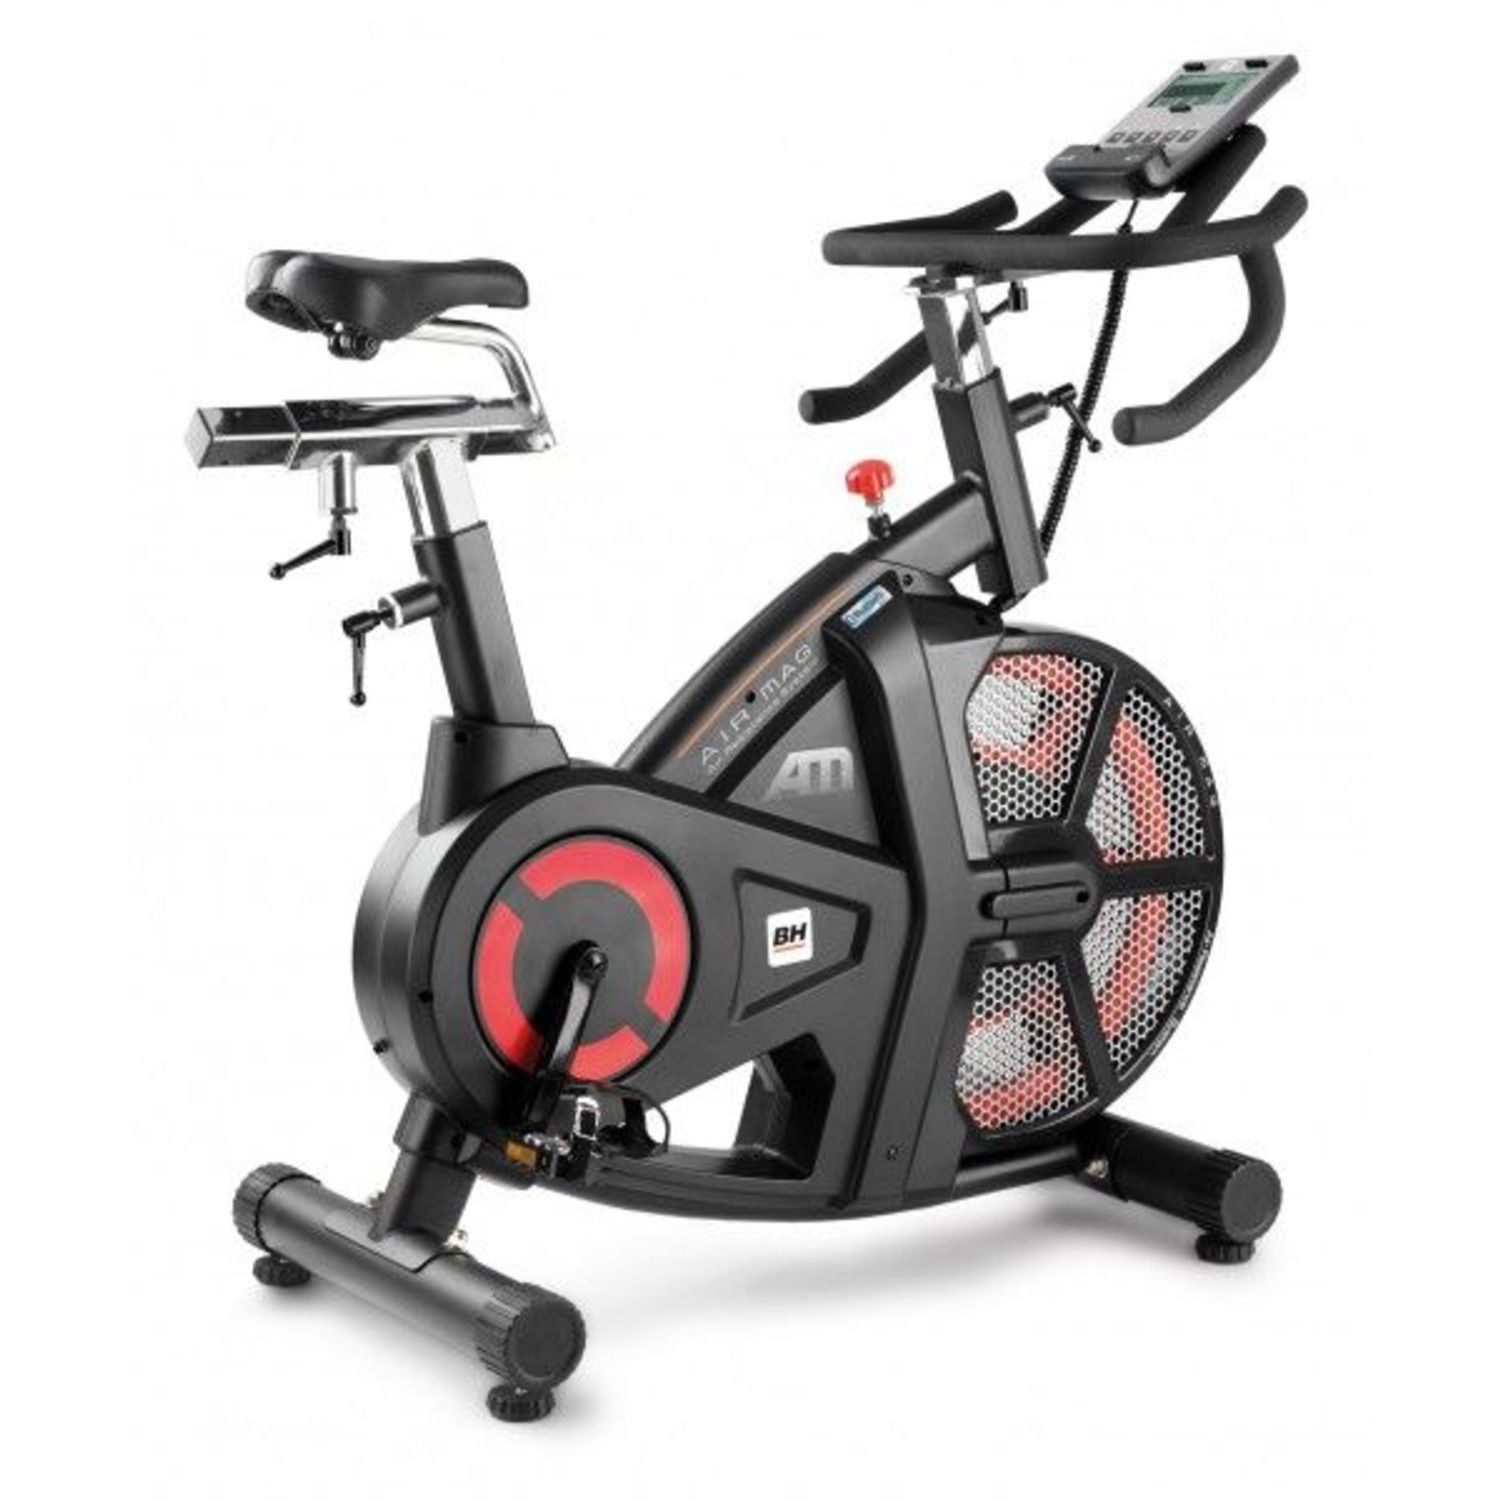 BH Fitness I.AIR MAG HIIT indoor cycle met Bluetooth 4.0